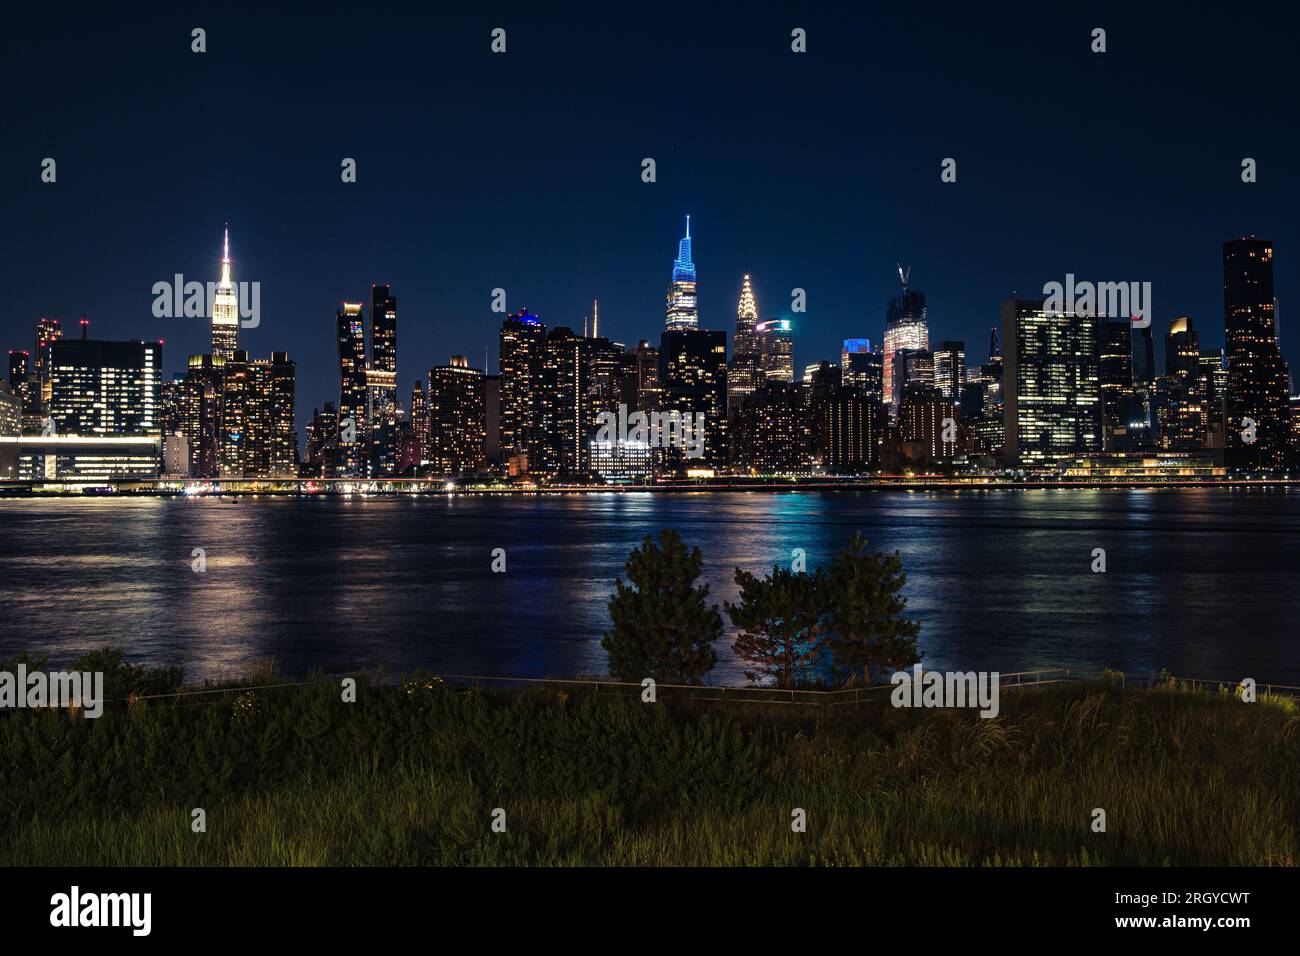 Iconic Manhattan skyline seen from Long Island City. Trees in the foreground, city lights on the cloudless summer night. Stock Photo